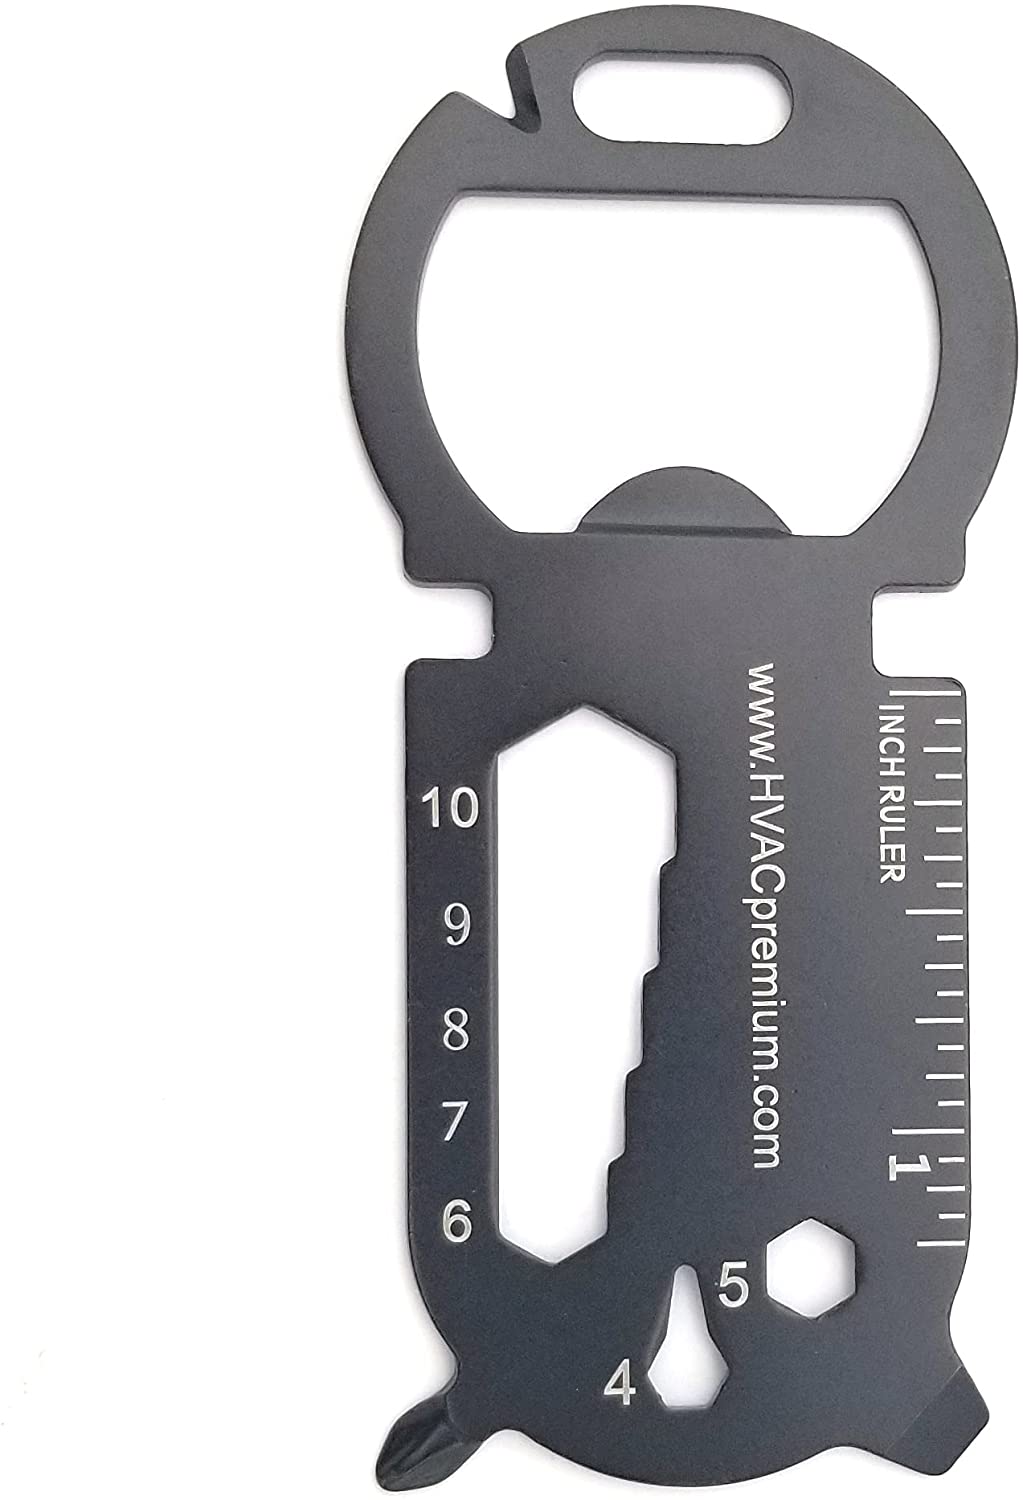 Multi-Function Keychain Multi-Tool Bottle Opener EDC Handy Accessory, Hex Tool (7 Sizes) , Screwdriver, Wrench, Bike Spoke/Wire Bender, Imperial Ruler, Crow Bar